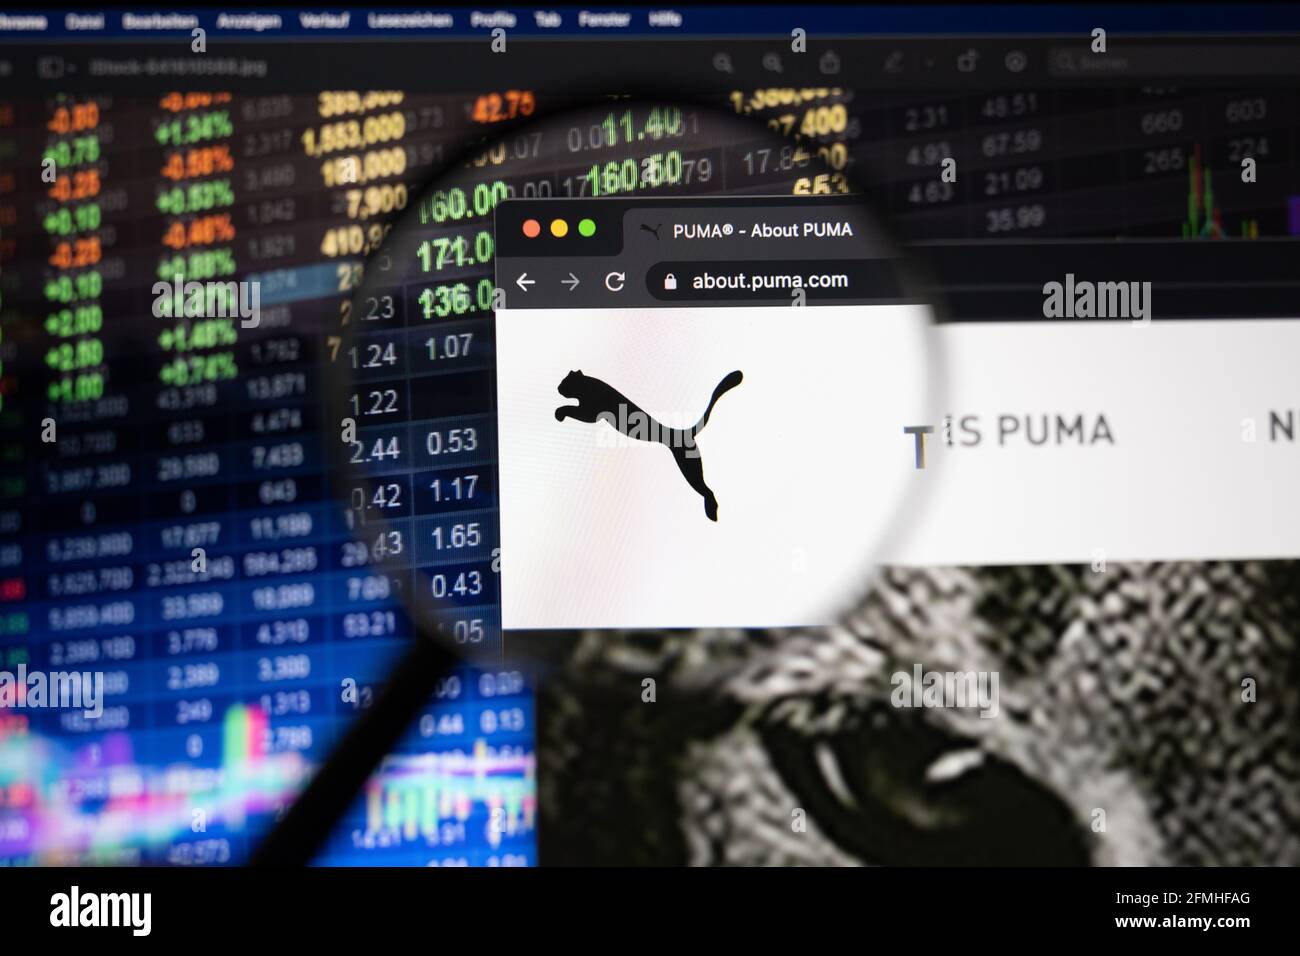 Puma company logo on a website with blurry stock market developments in the background, seen on a computer screen through a magnifying glass Stock Photo